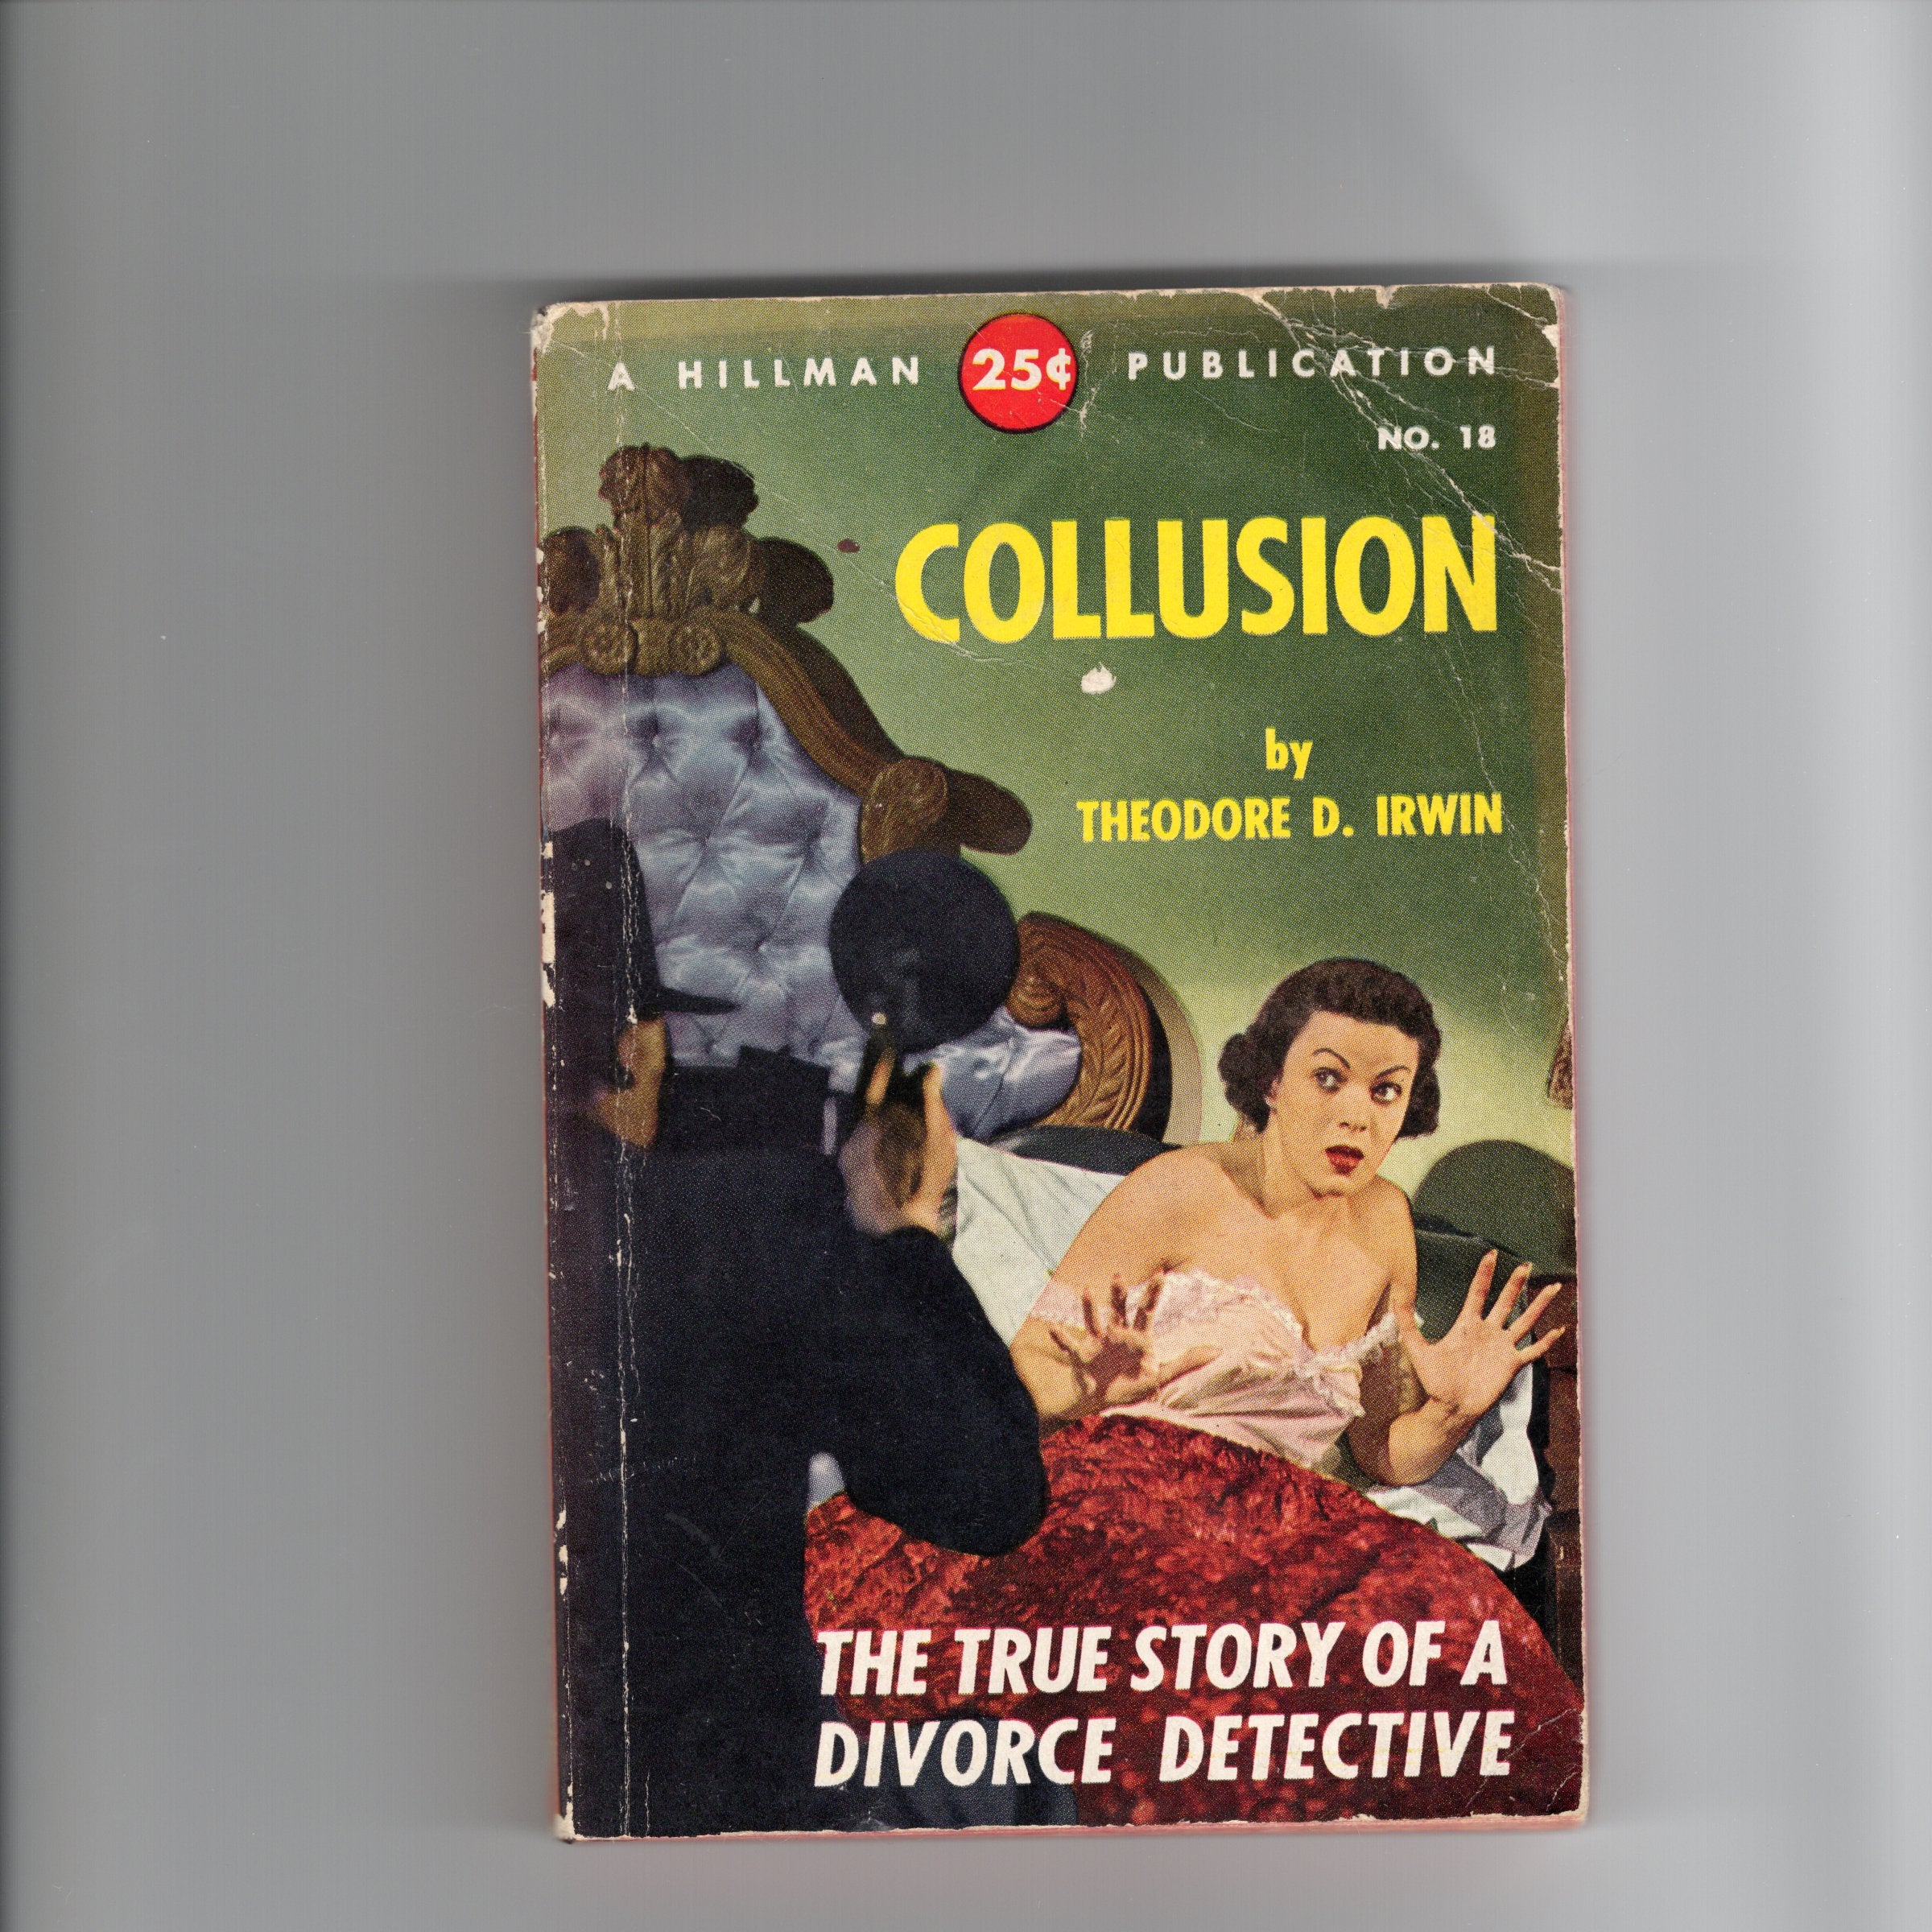 Collusion by Theodore D. Irwin